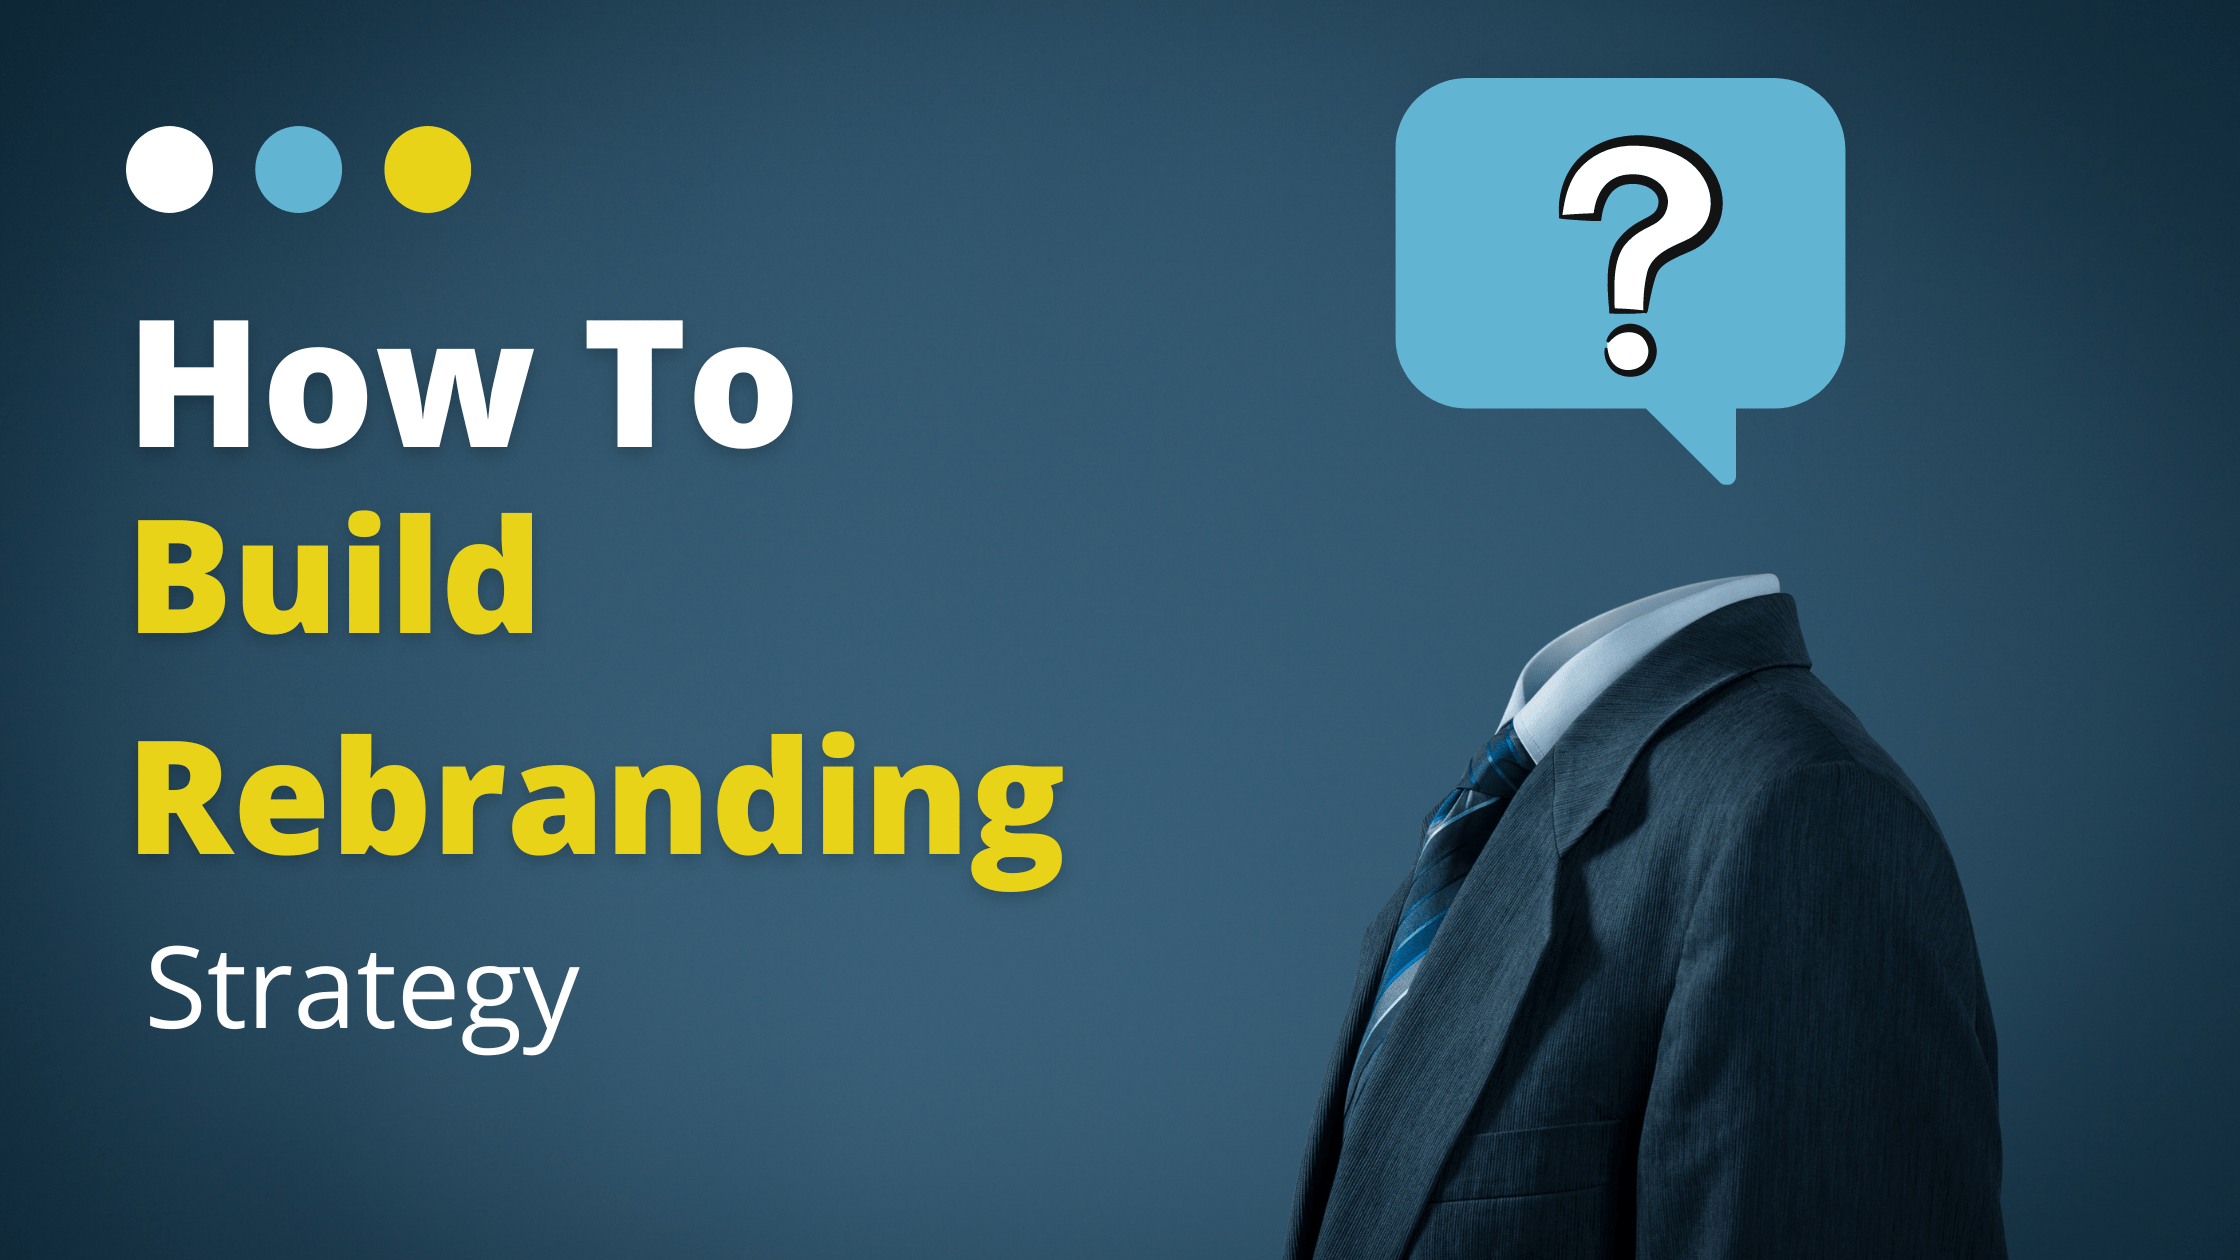 How To Build Rebranding Strategy